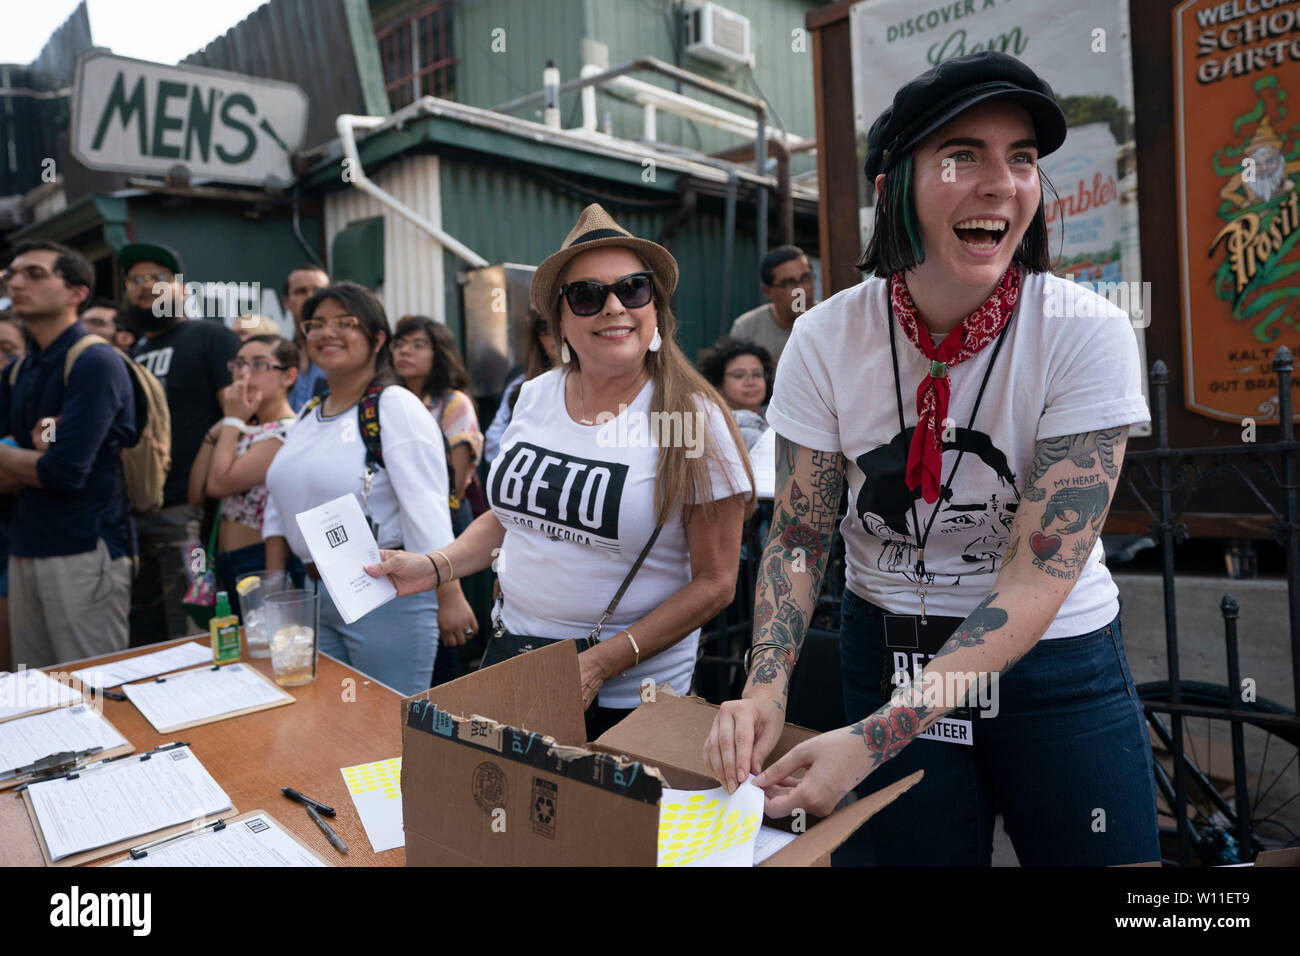 Enthusiastic young Beto O'Rourke supporters check in attendees at a campaign rally for the Democratic contender for the presidential nomination during an event at Scholz Garten in downtown Austin, Texas USA. Stock Photo